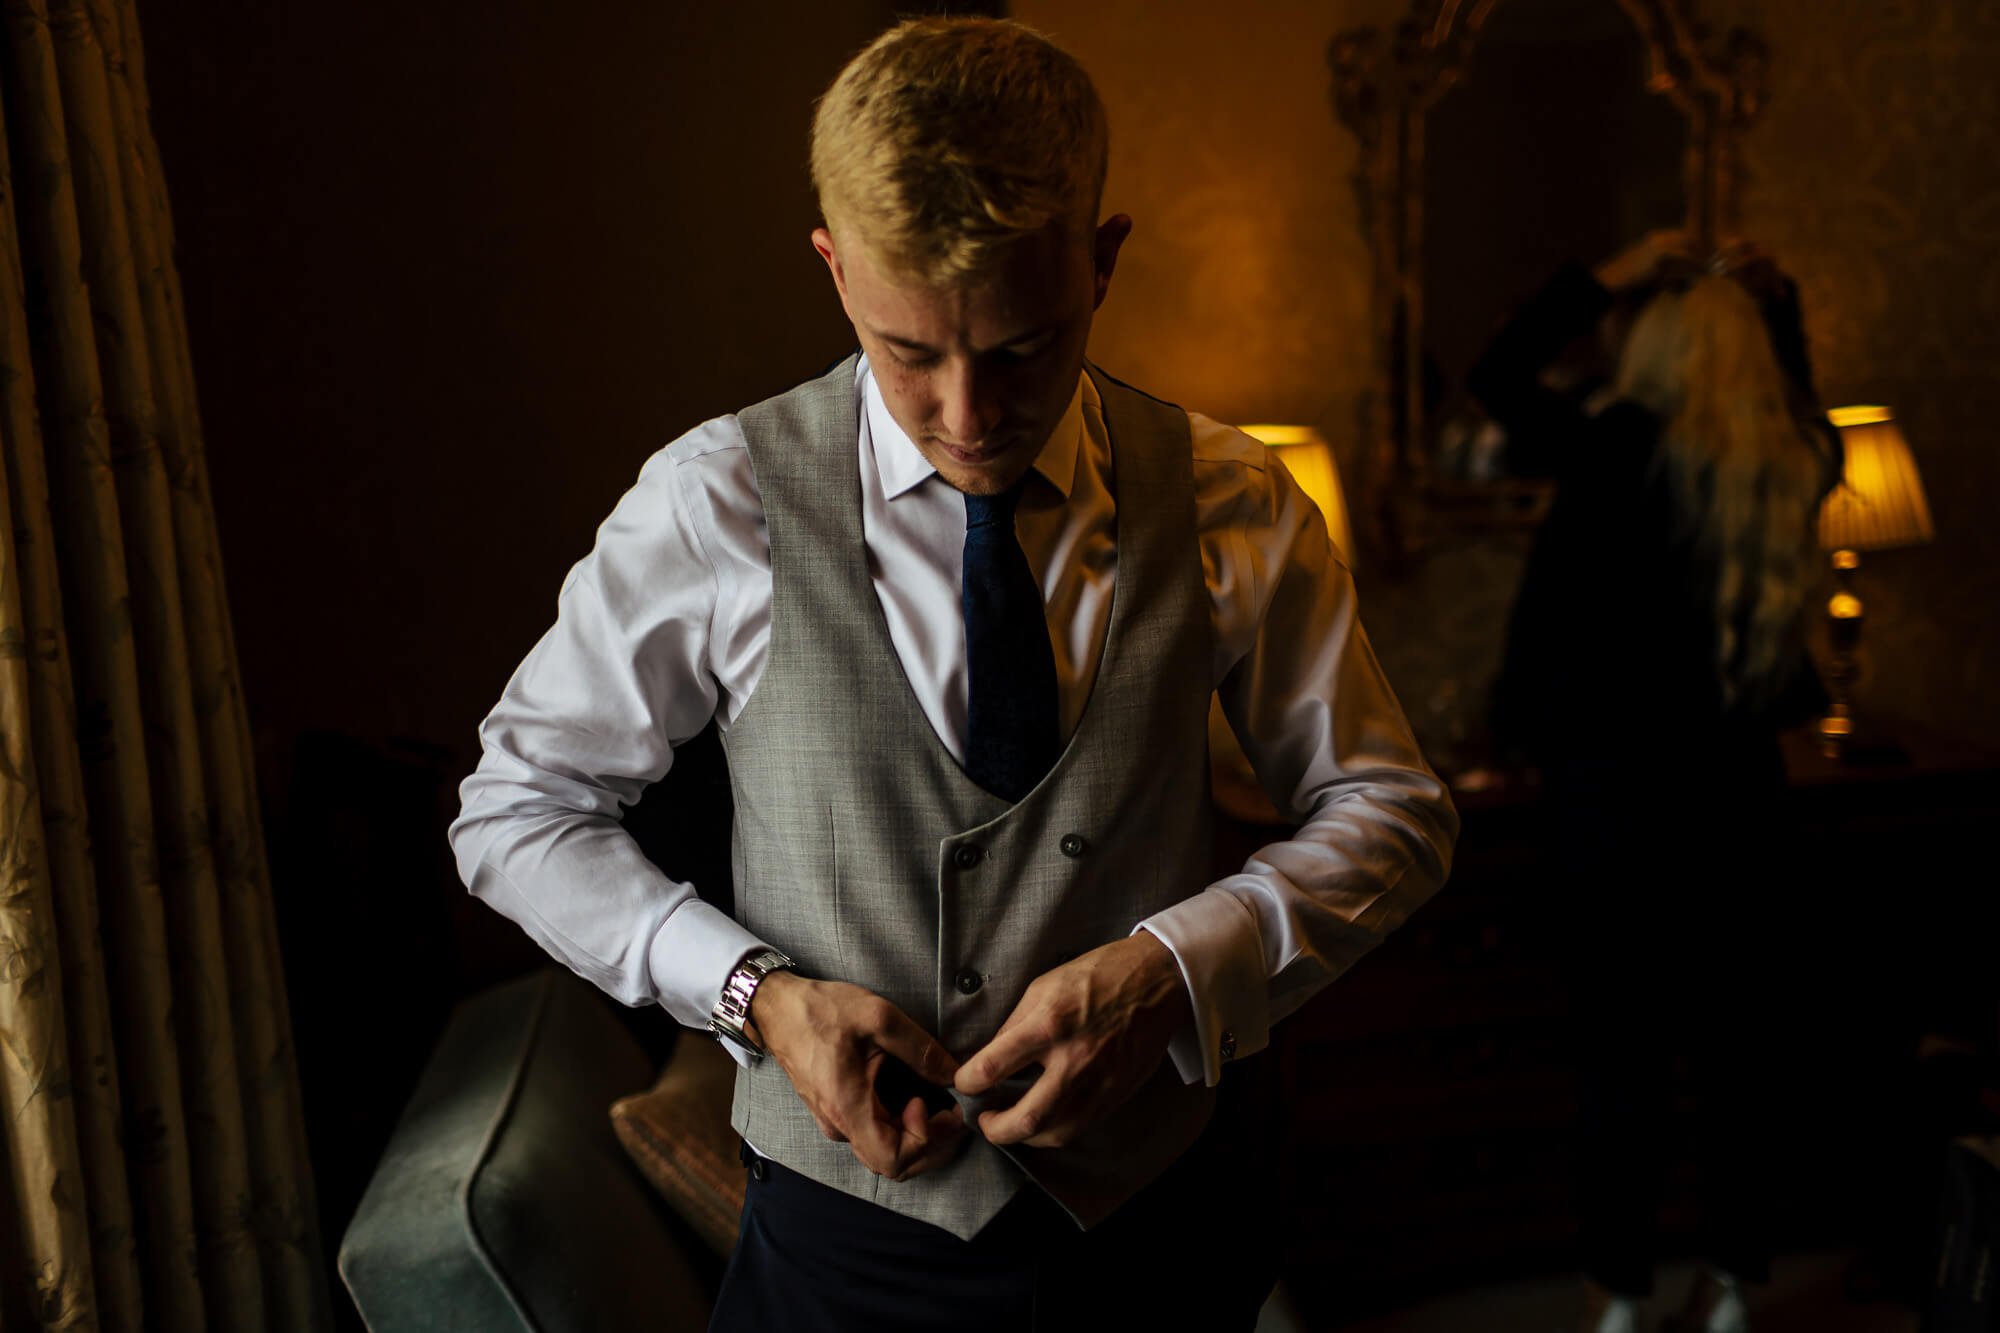 Groom getting dressed and ready for his wedding in Cumbria